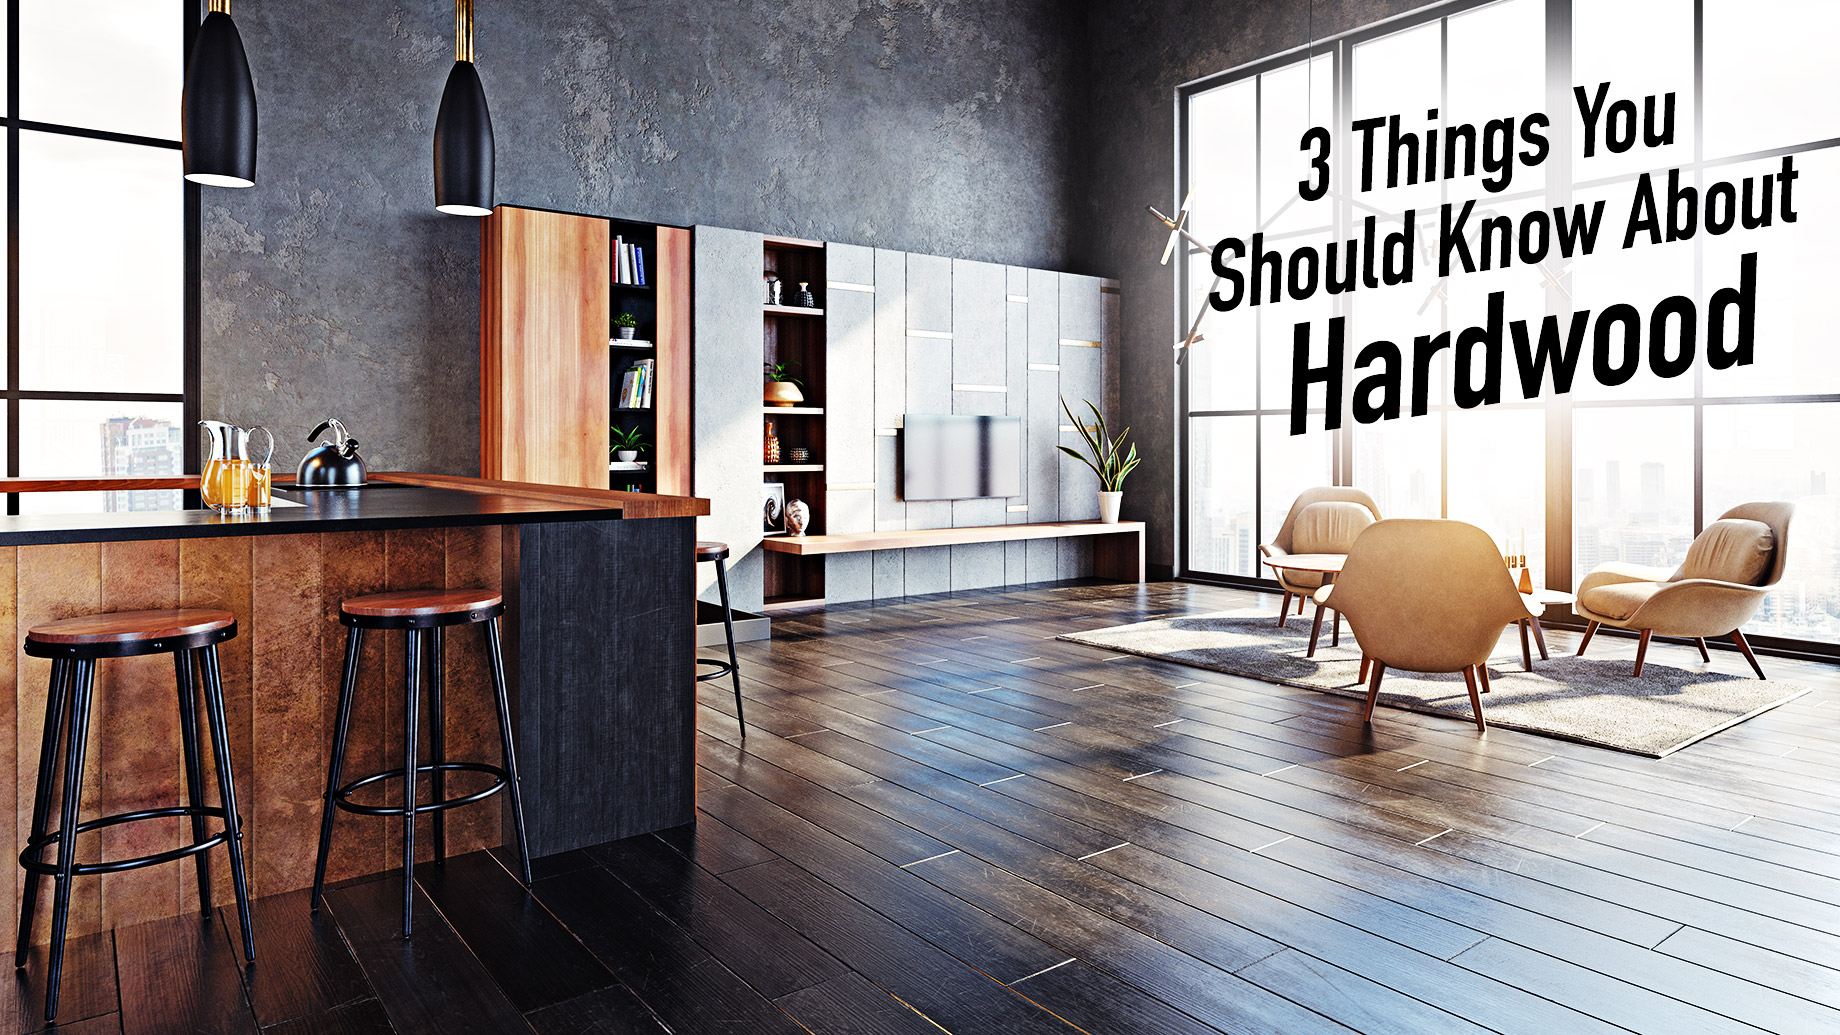 3 Things You Should Know About Hardwood